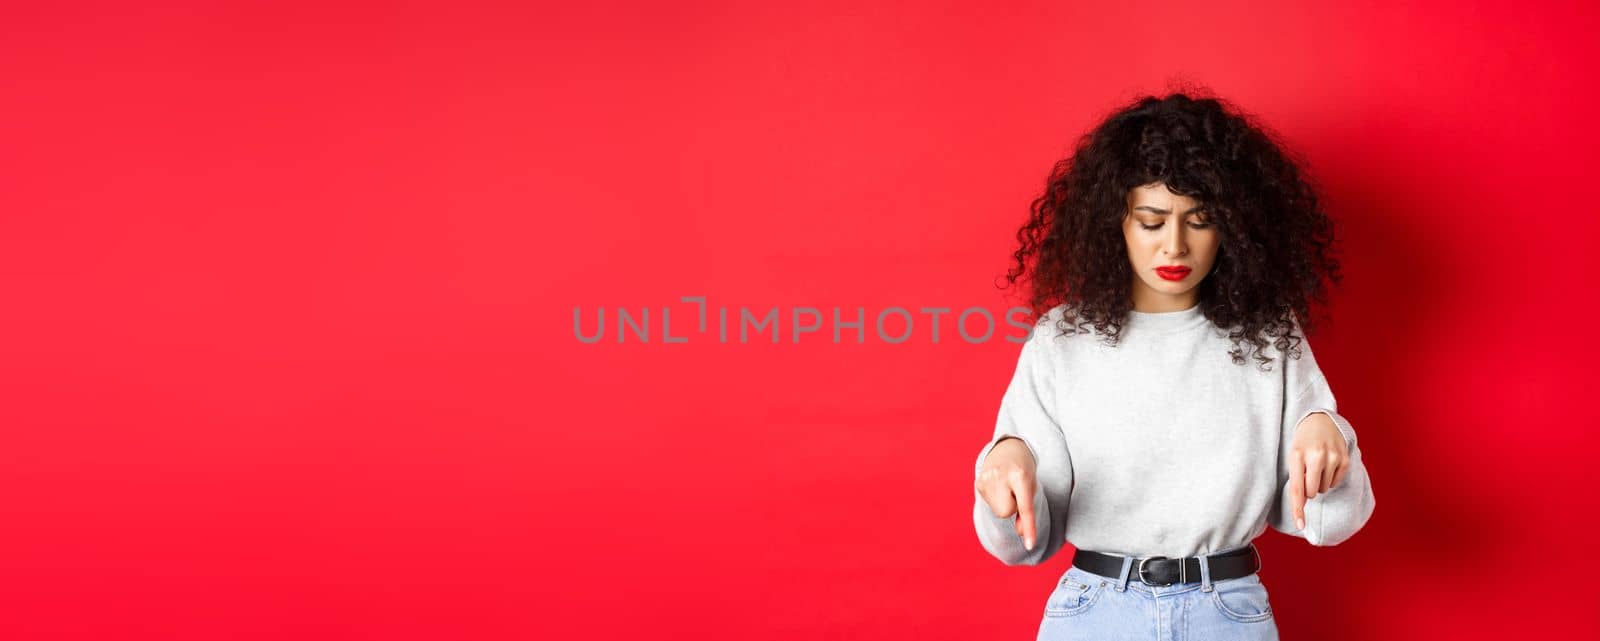 Worried young woman with curly hairstyle, looking down and pointing at empty space with concerned hesitant face, standing on red background.